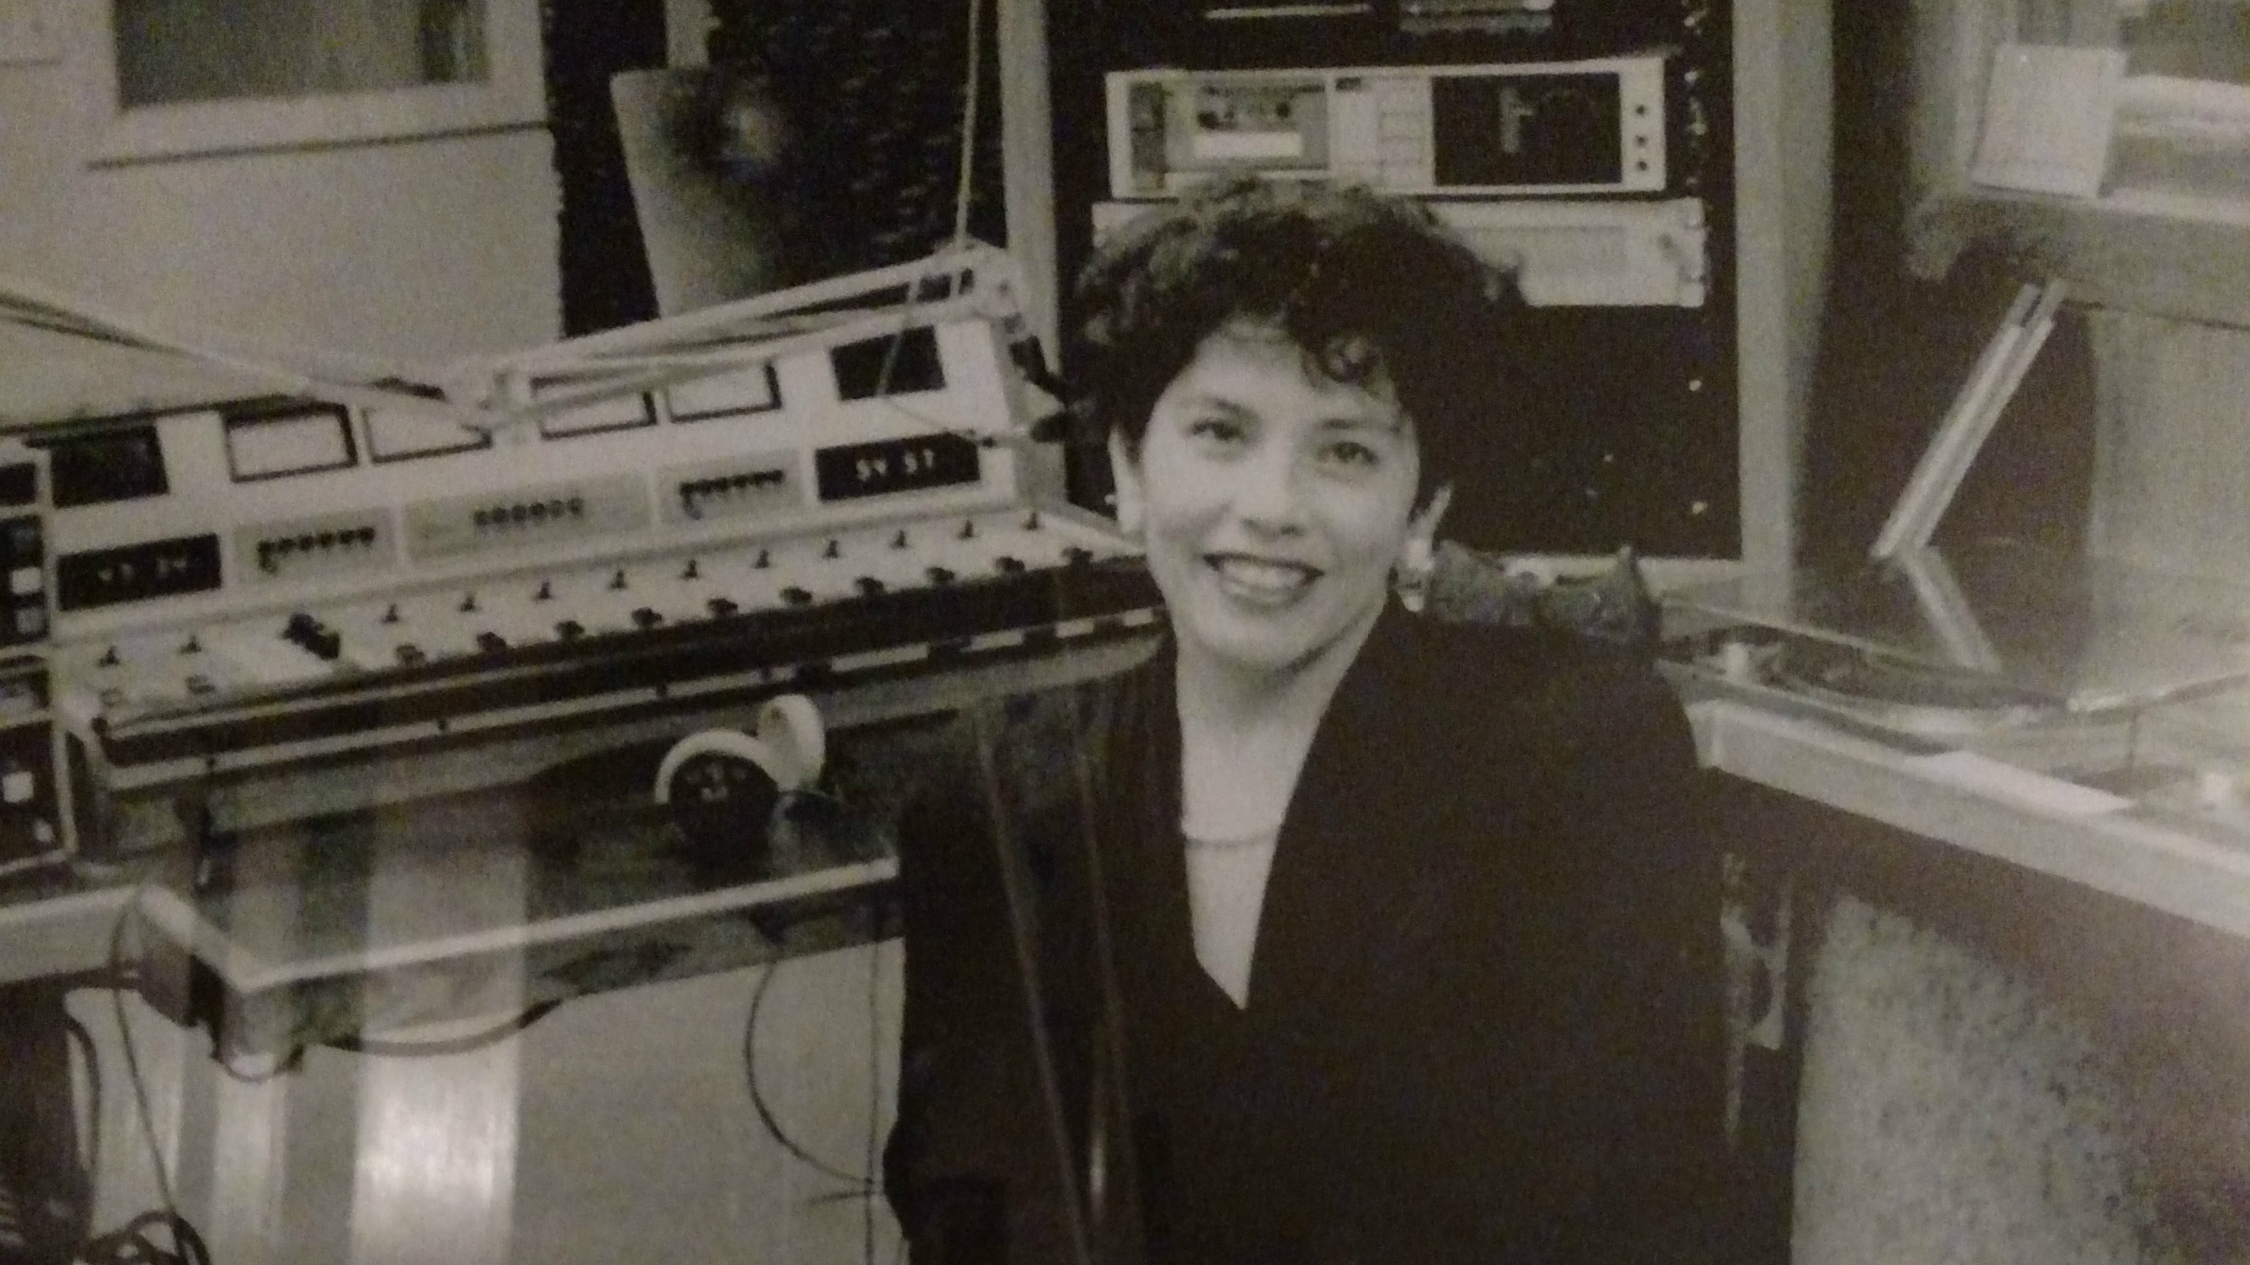 Photo: KUVO founder Florence Hernandez Ramos in a 1980s radio studio CROPPED